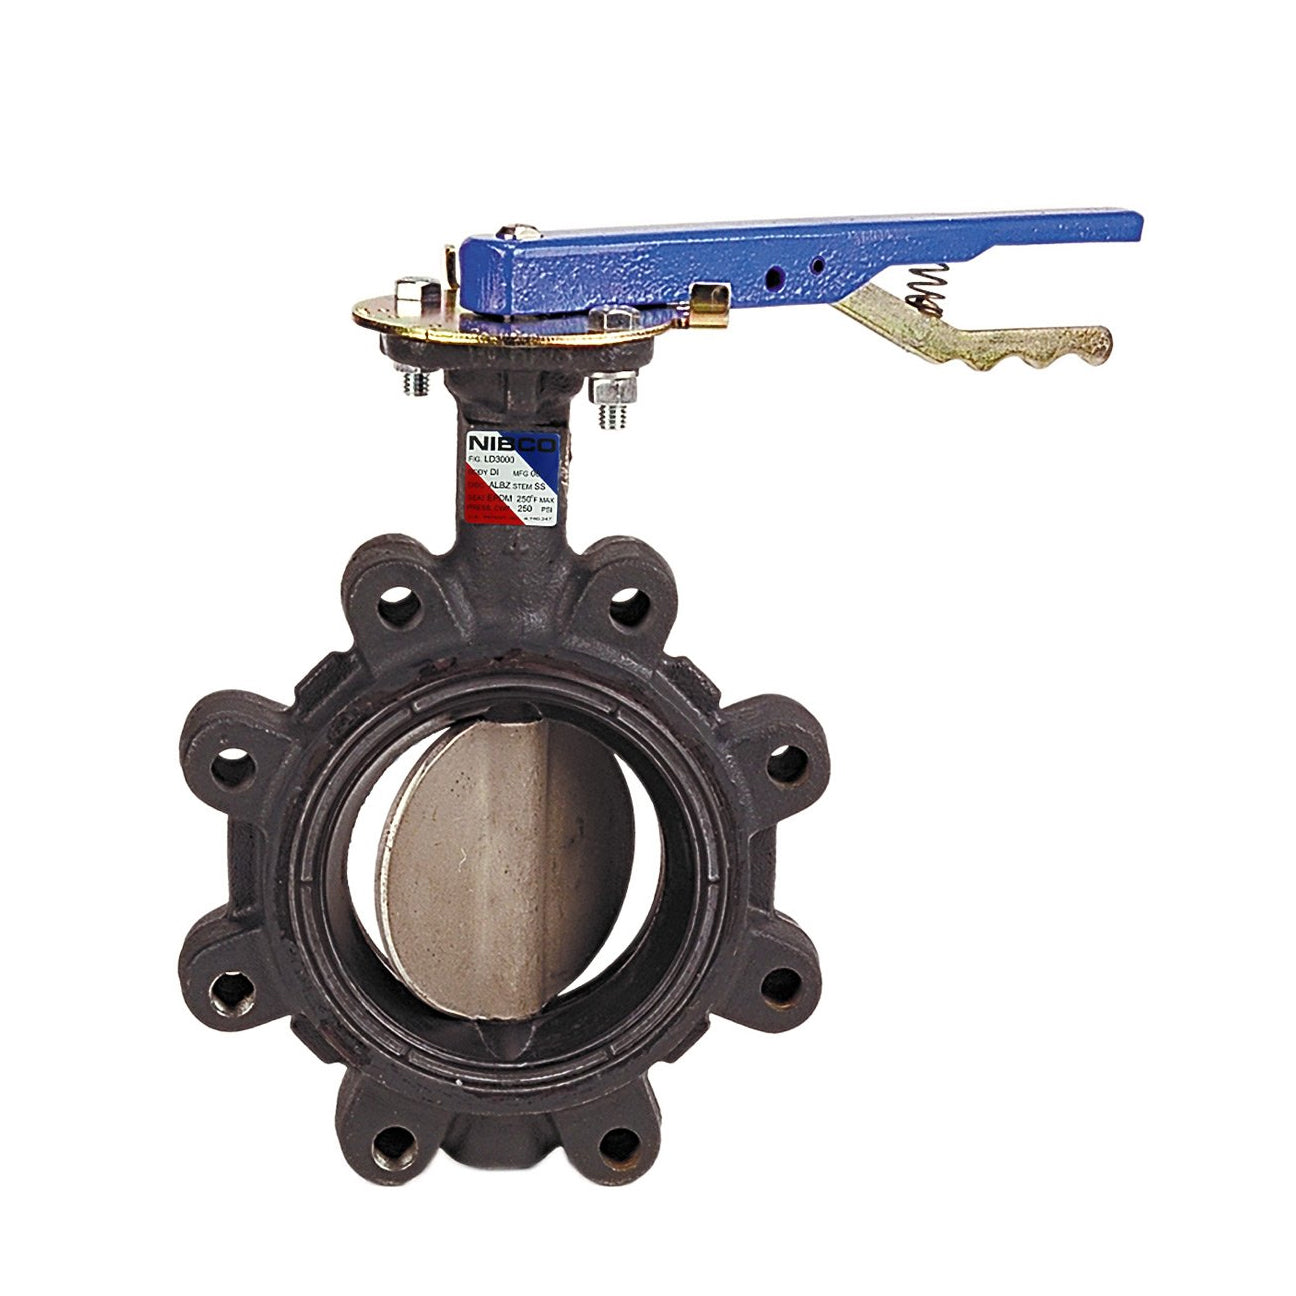 NLG100H - LD-2000 Ductile Iron Lug Type Butterfly Valve - Lever Lock Handle - 4"